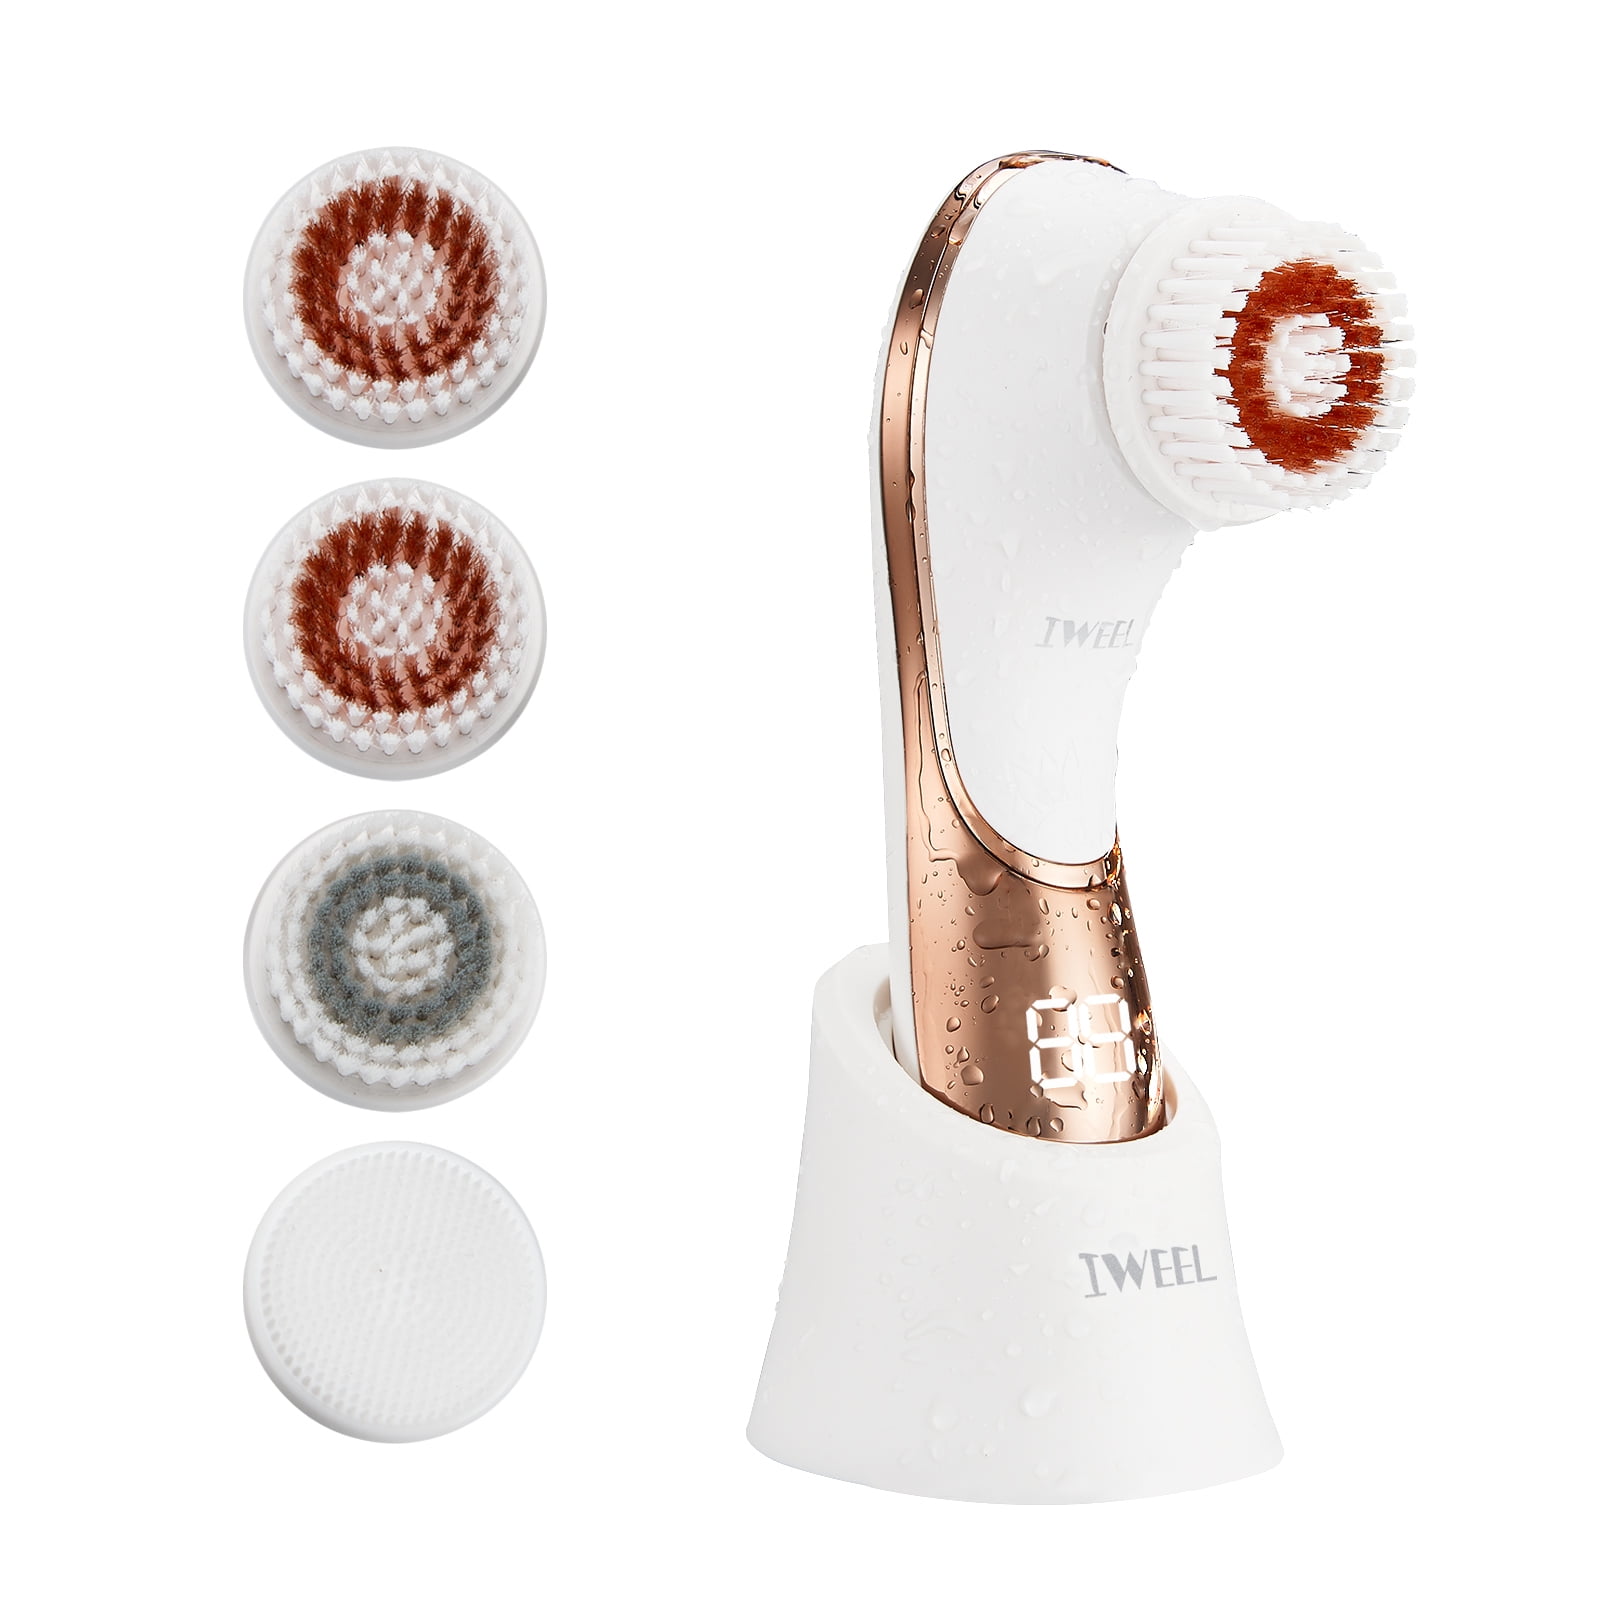 Facial Cleansing Brush, Electric Face Brush Scrubber, 53% OFF